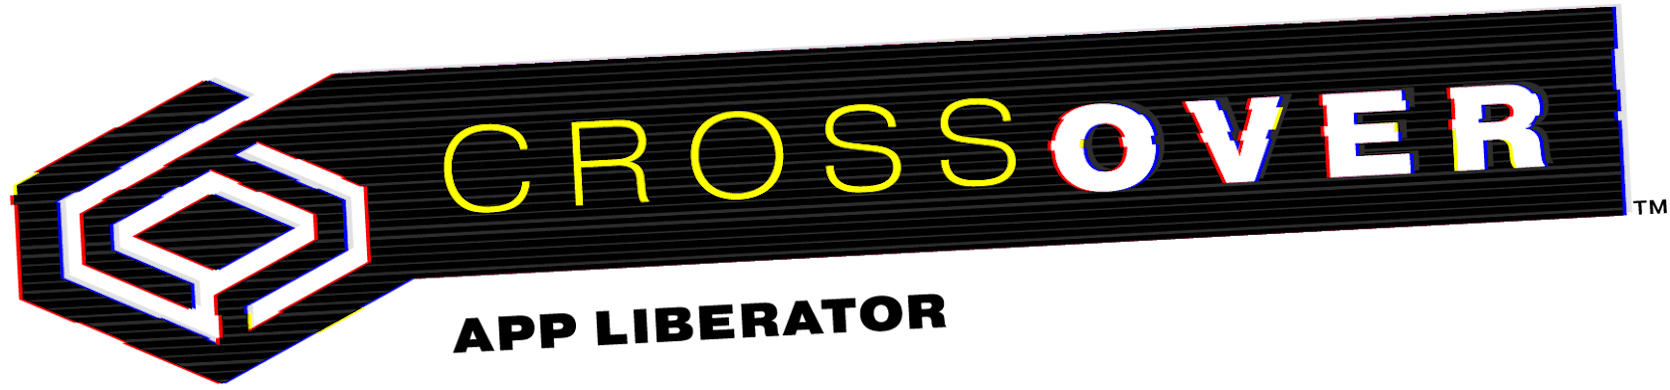 CrossOver-logo.png